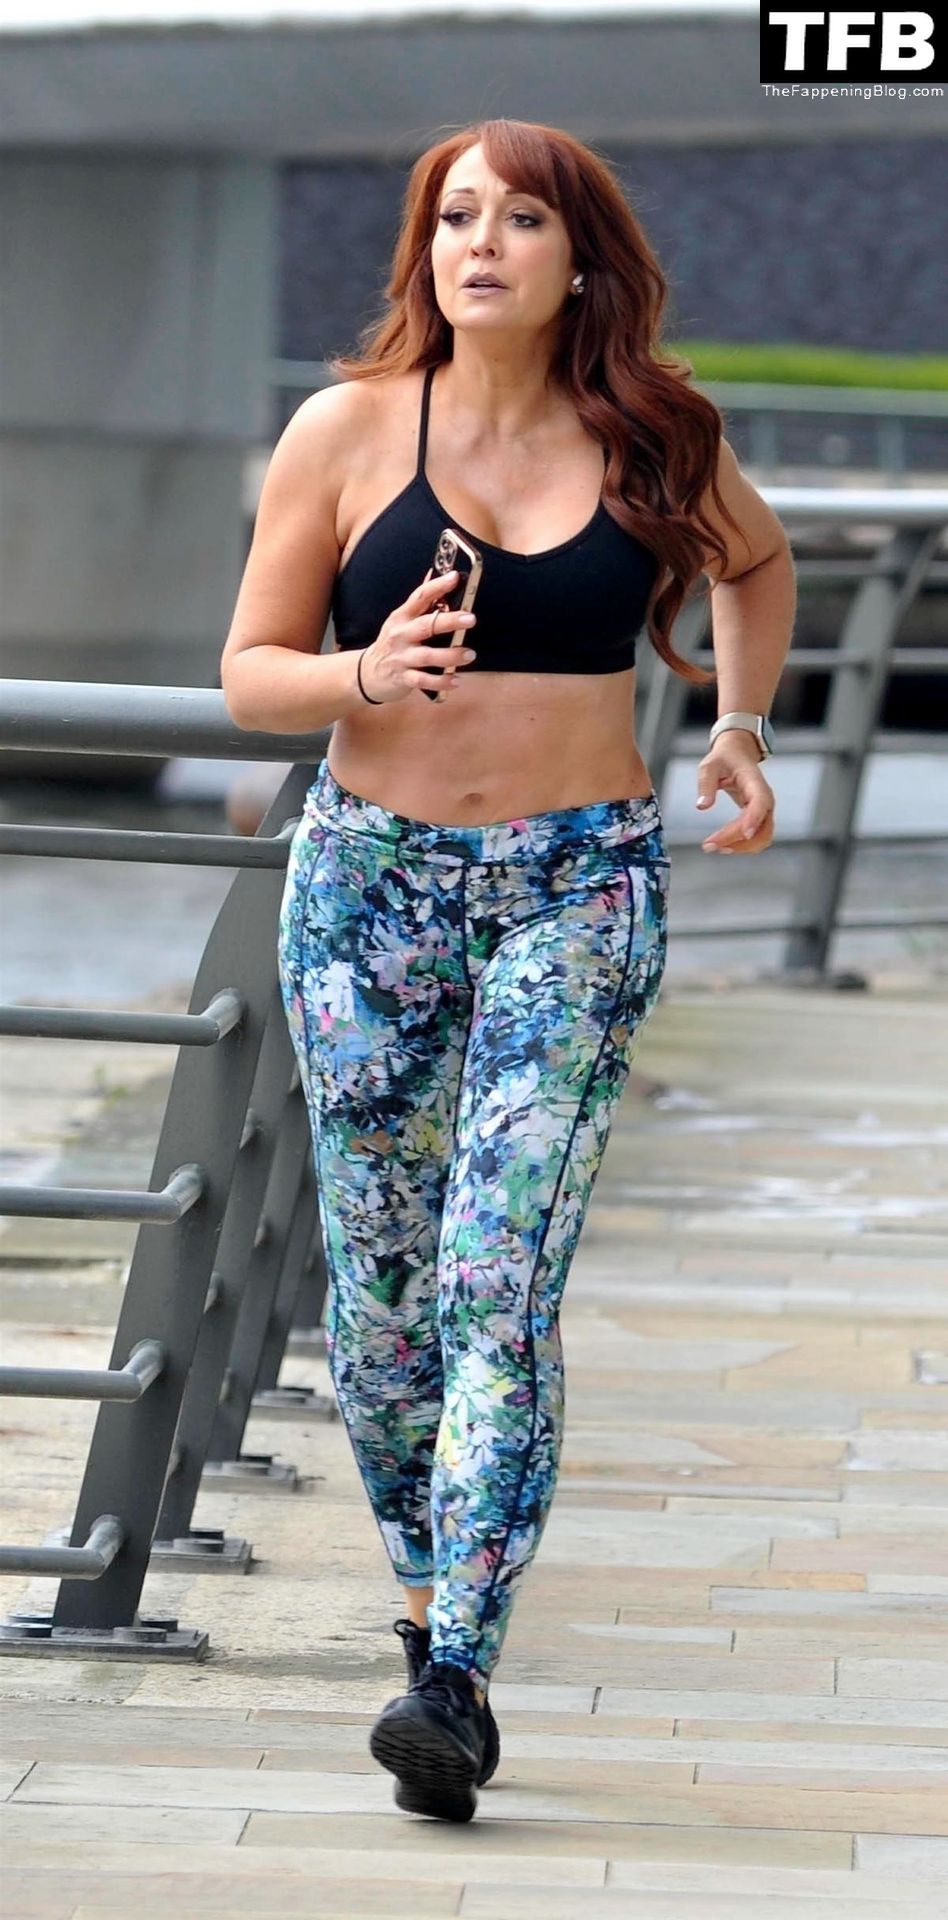 Amy Anzel Sexy The Fappening Blog 3 - Amy Anzel Puts on a Busty Display Working Out at Media City in Manchester (13 Photos)